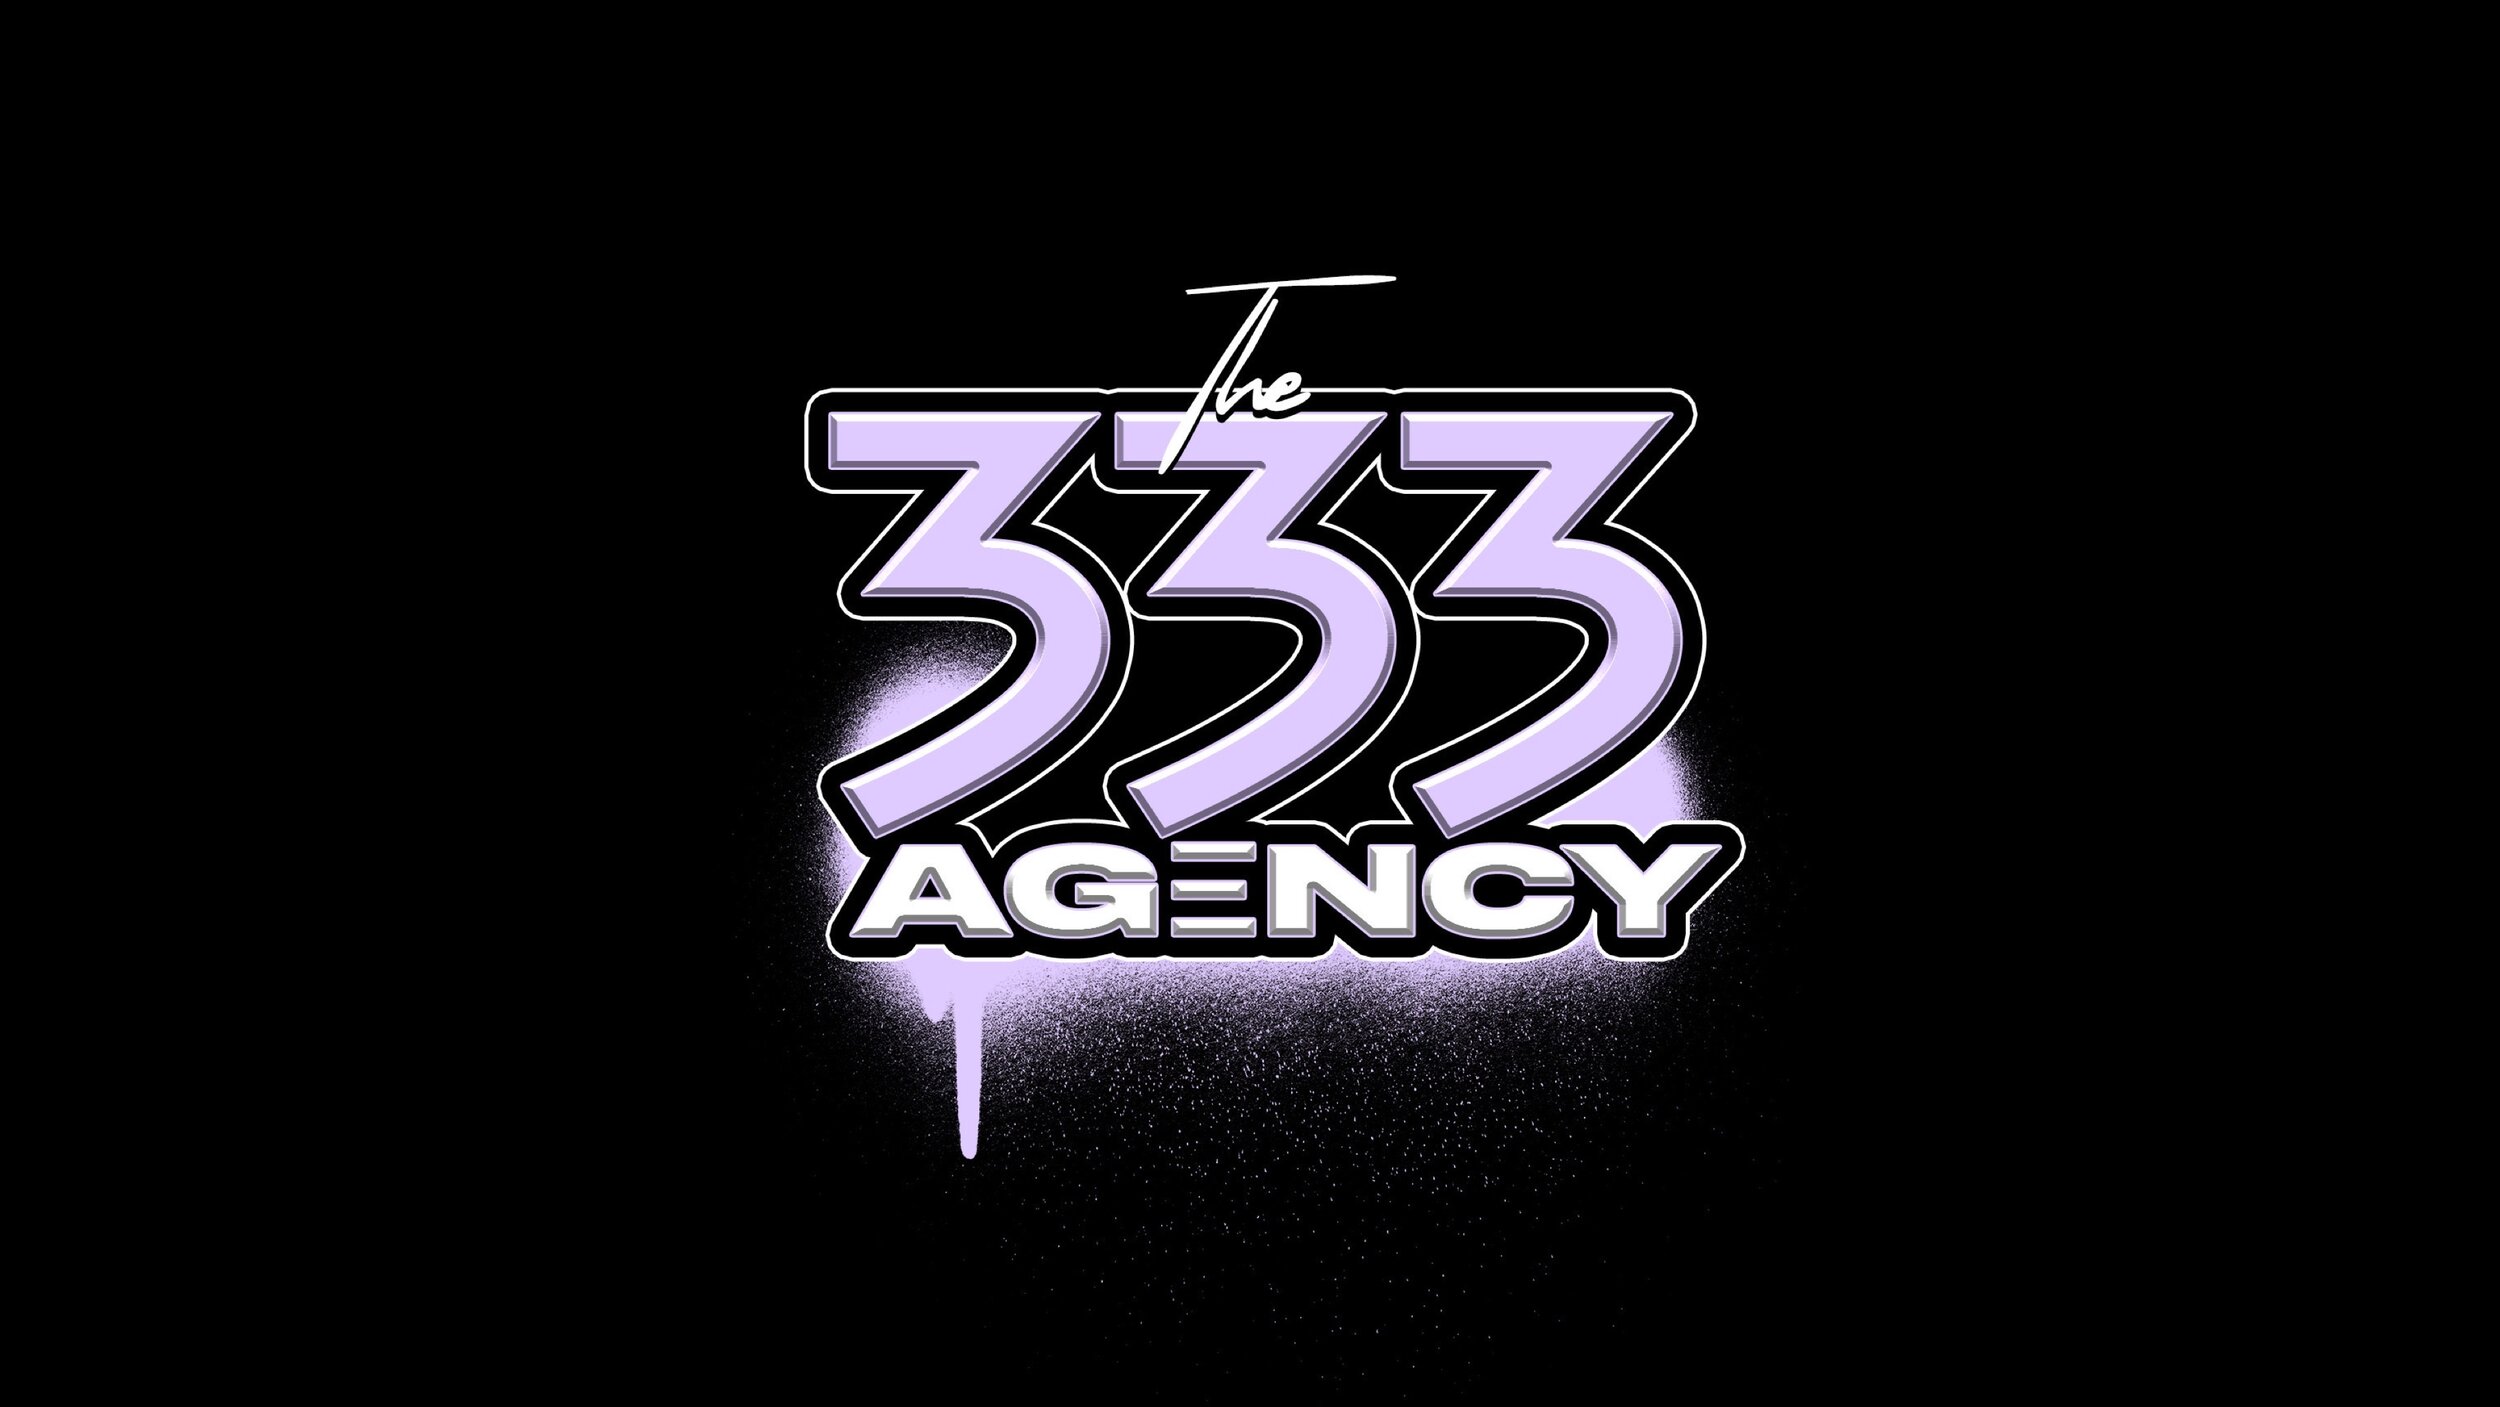 THE 333 AGENCY